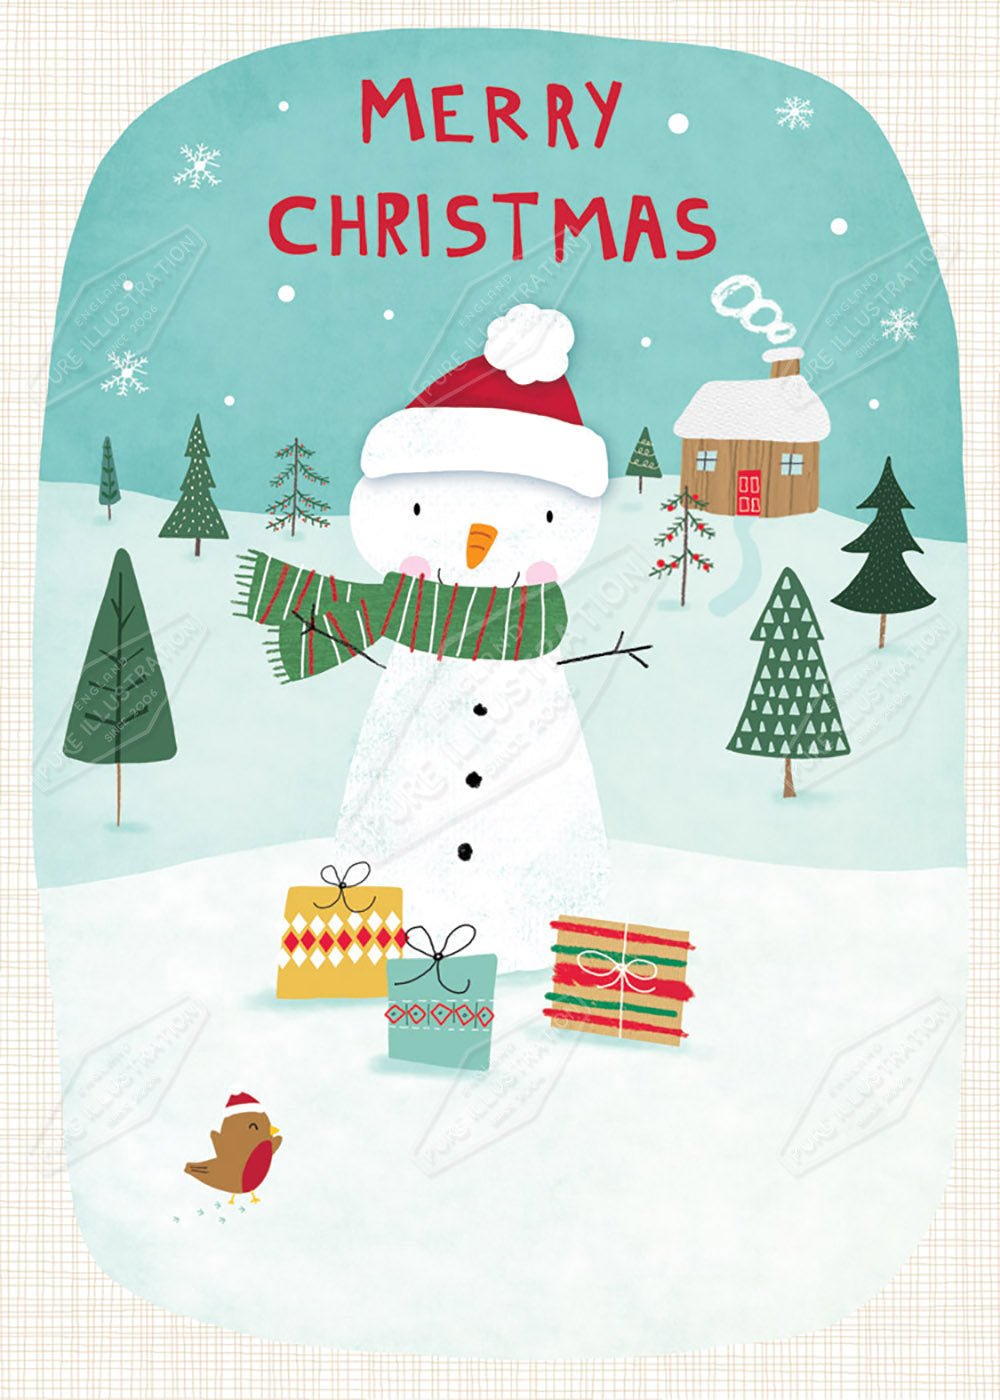 Snowman Illustration by Cory Reid for Pure Art Licensing Agency & Surface Design Studio